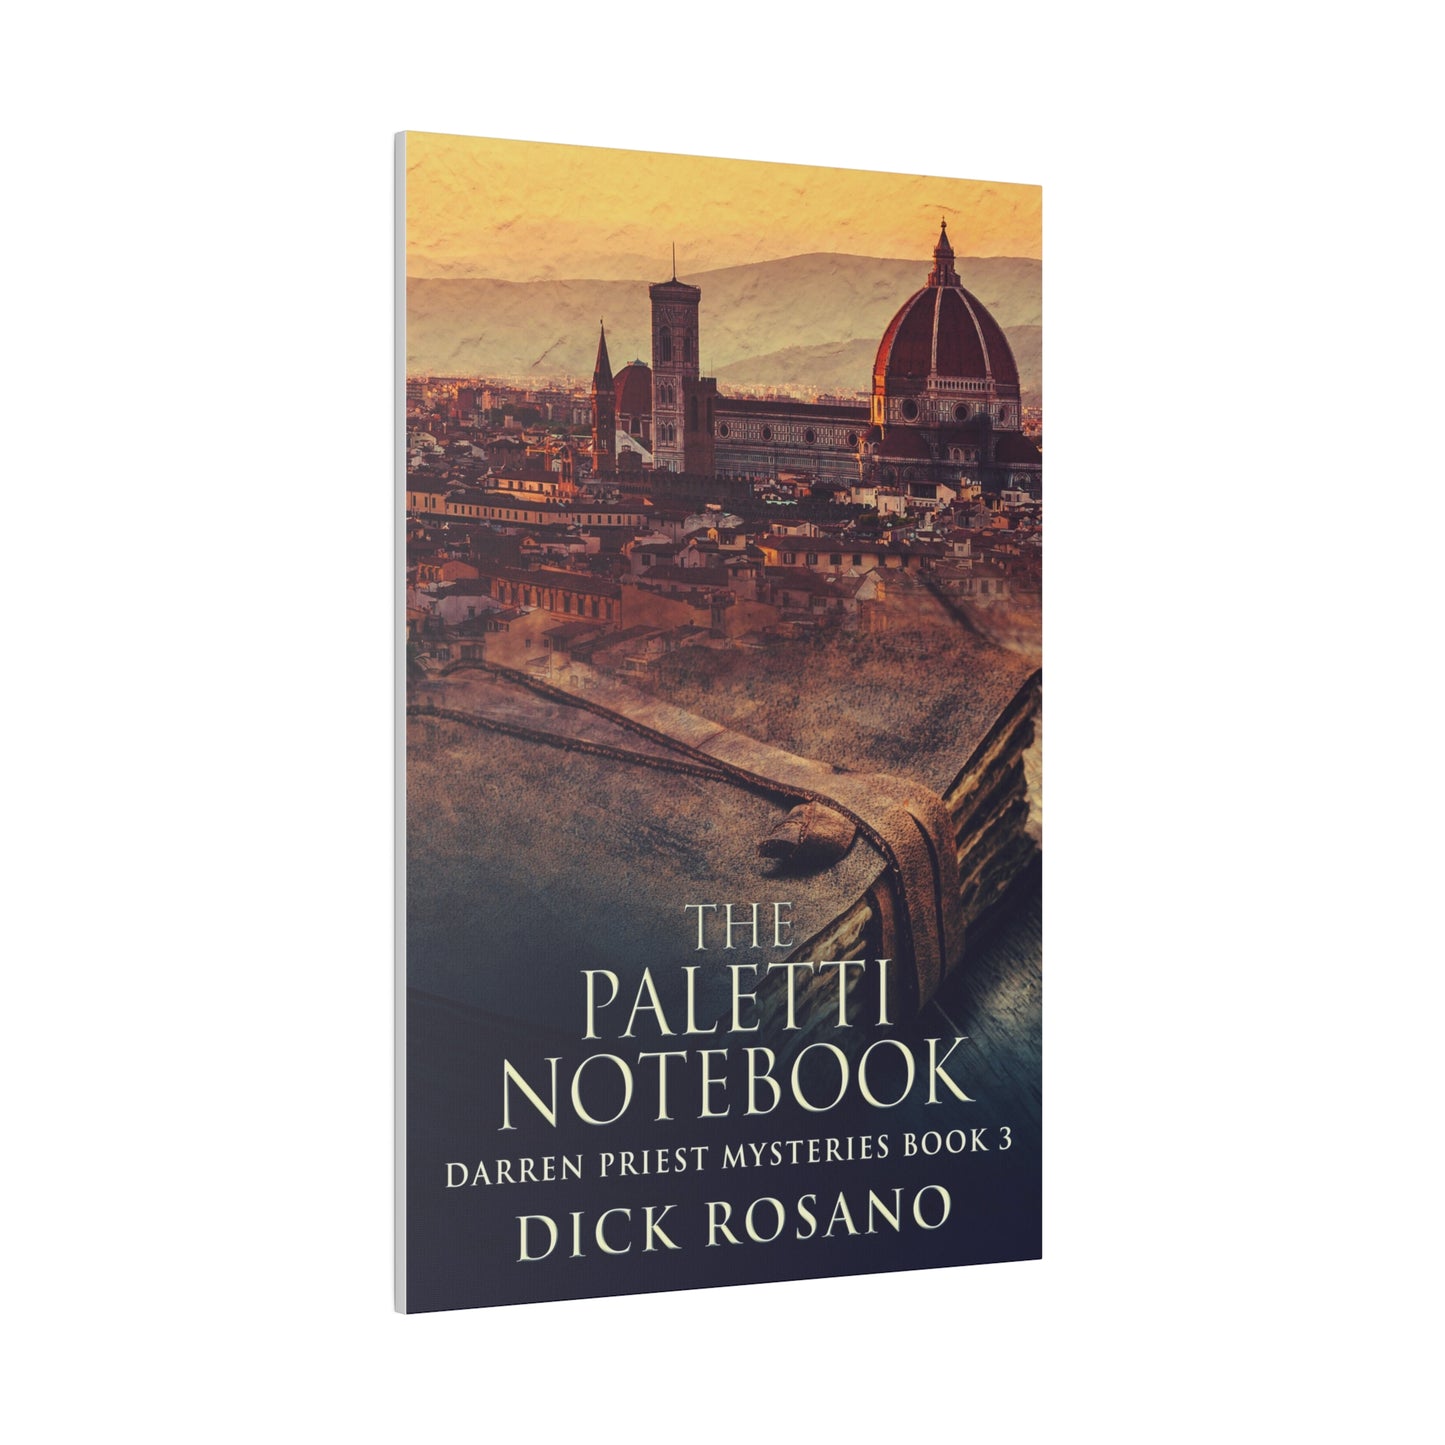 The Paletti Notebook - Canvas